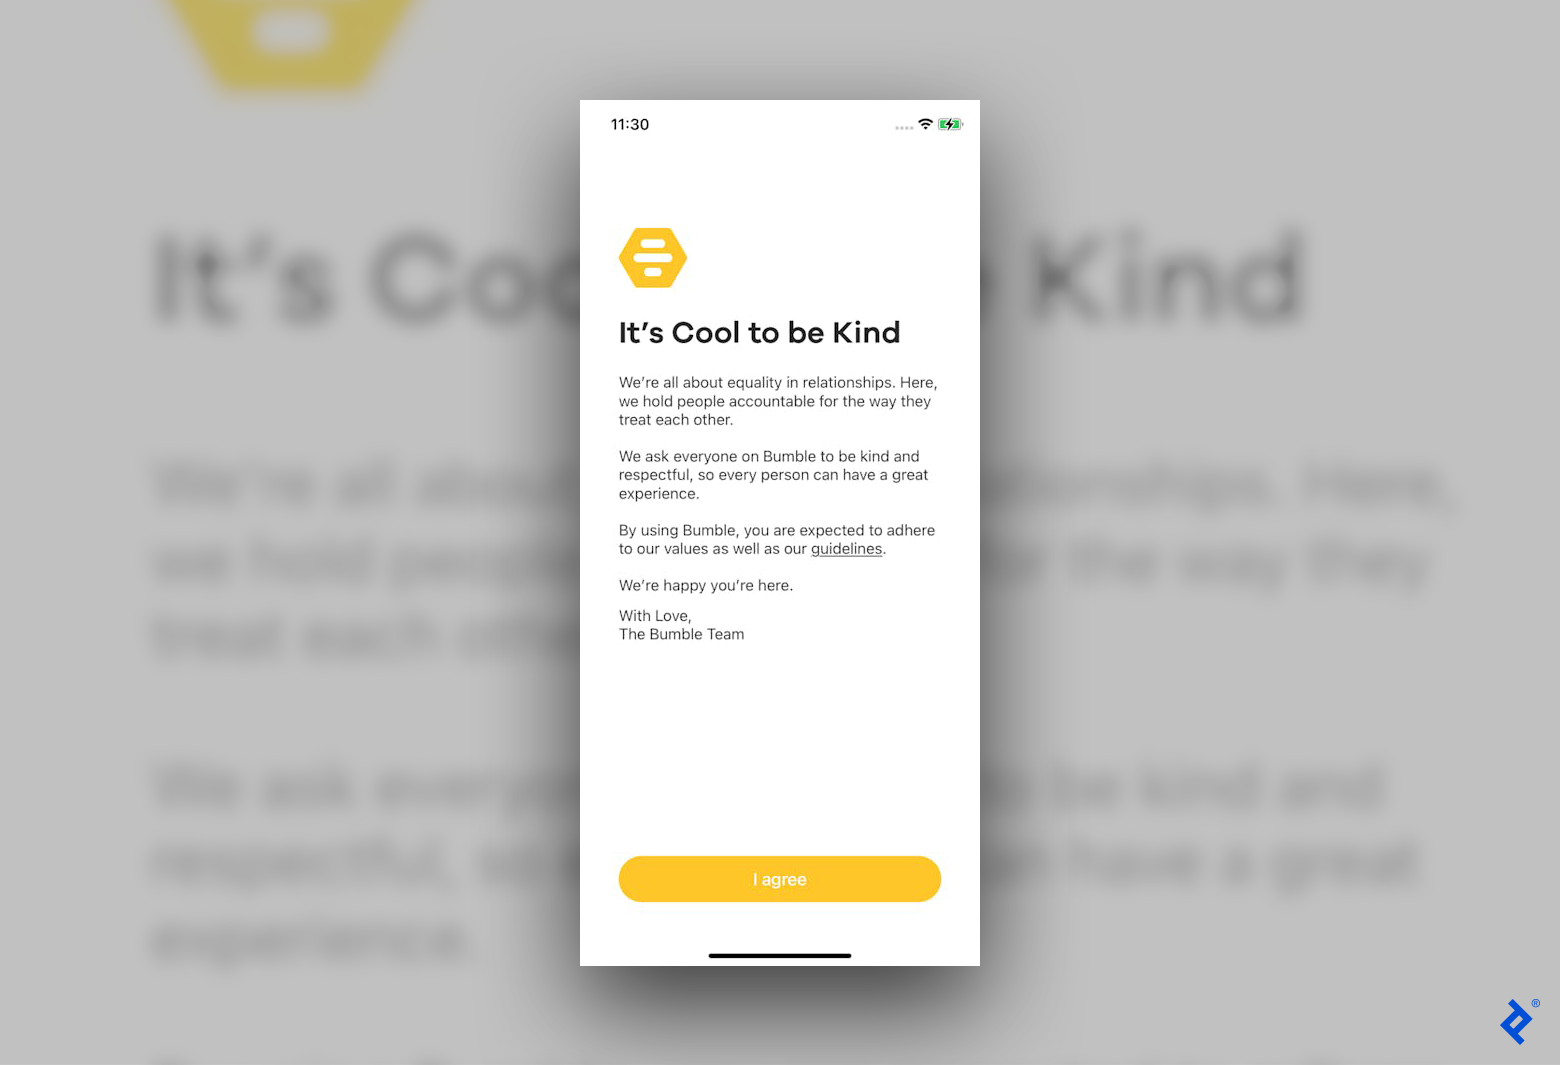 Bumble prioritizes user safety in their onboarding process, gently reminding new users on their guidelines.